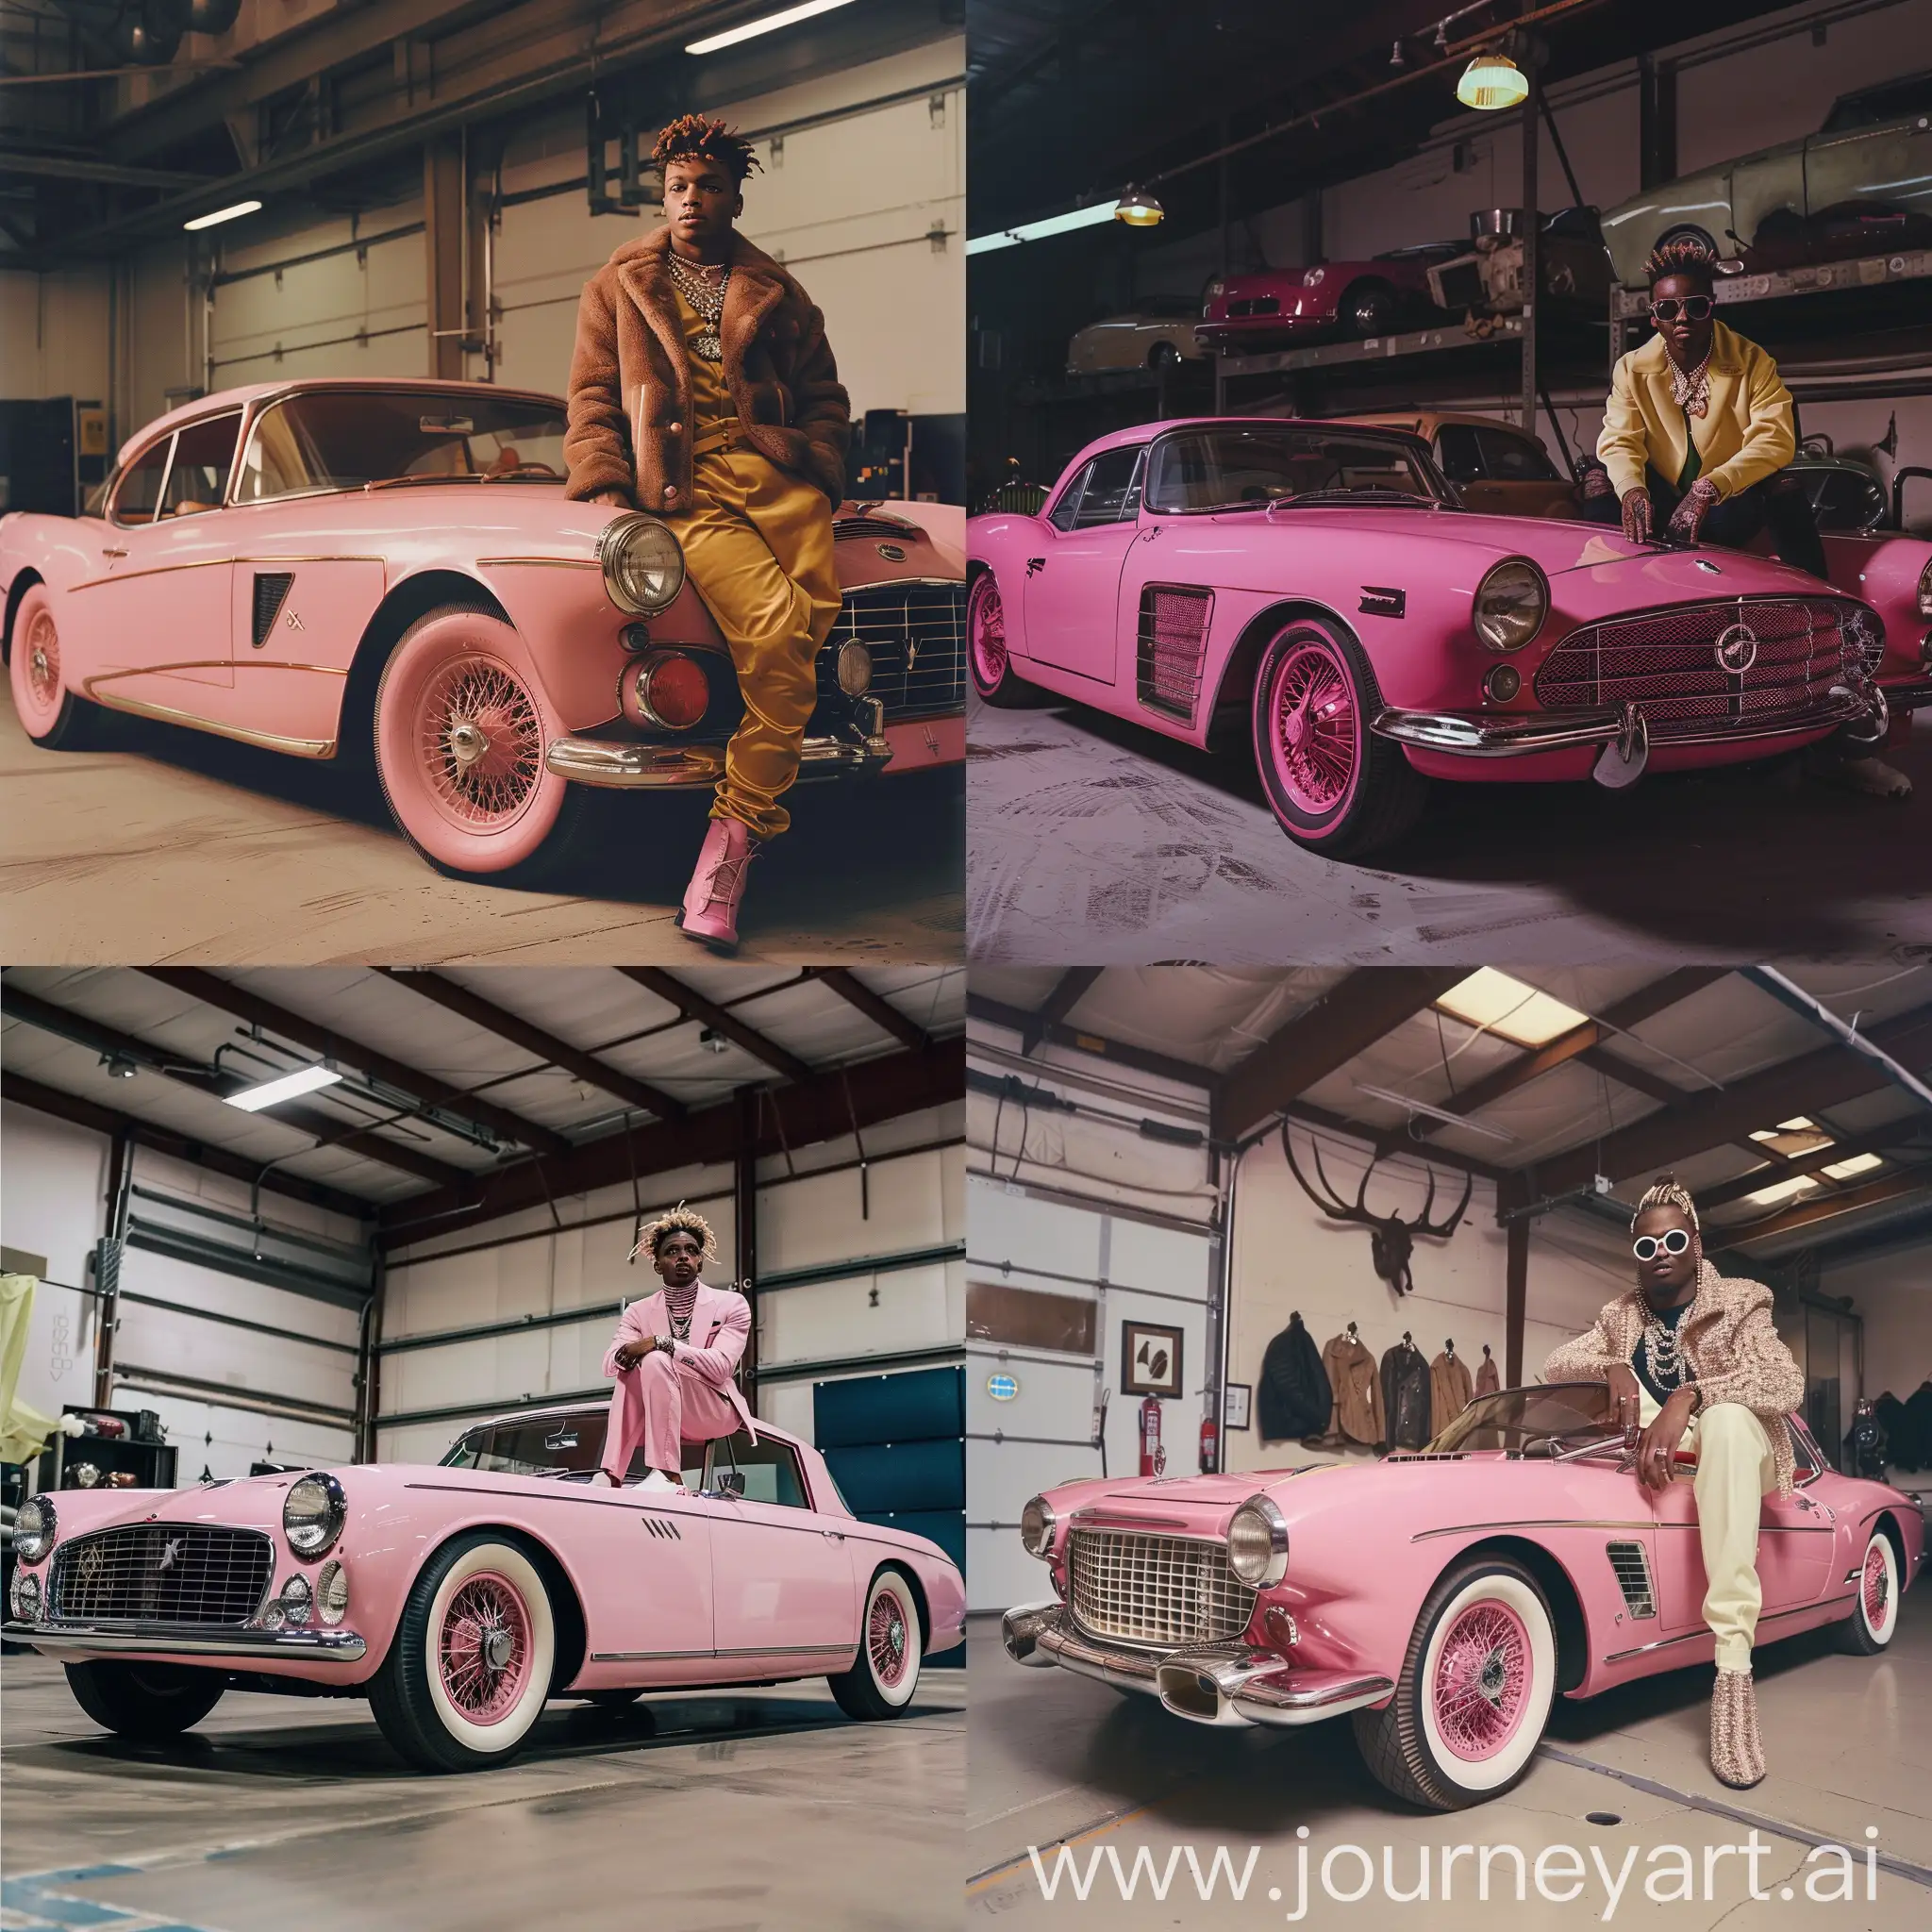 Juice-Wrld-in-1960s-Fashion-with-Pink-1954-Facel-Vega-FV-in-Luxurious-Garage